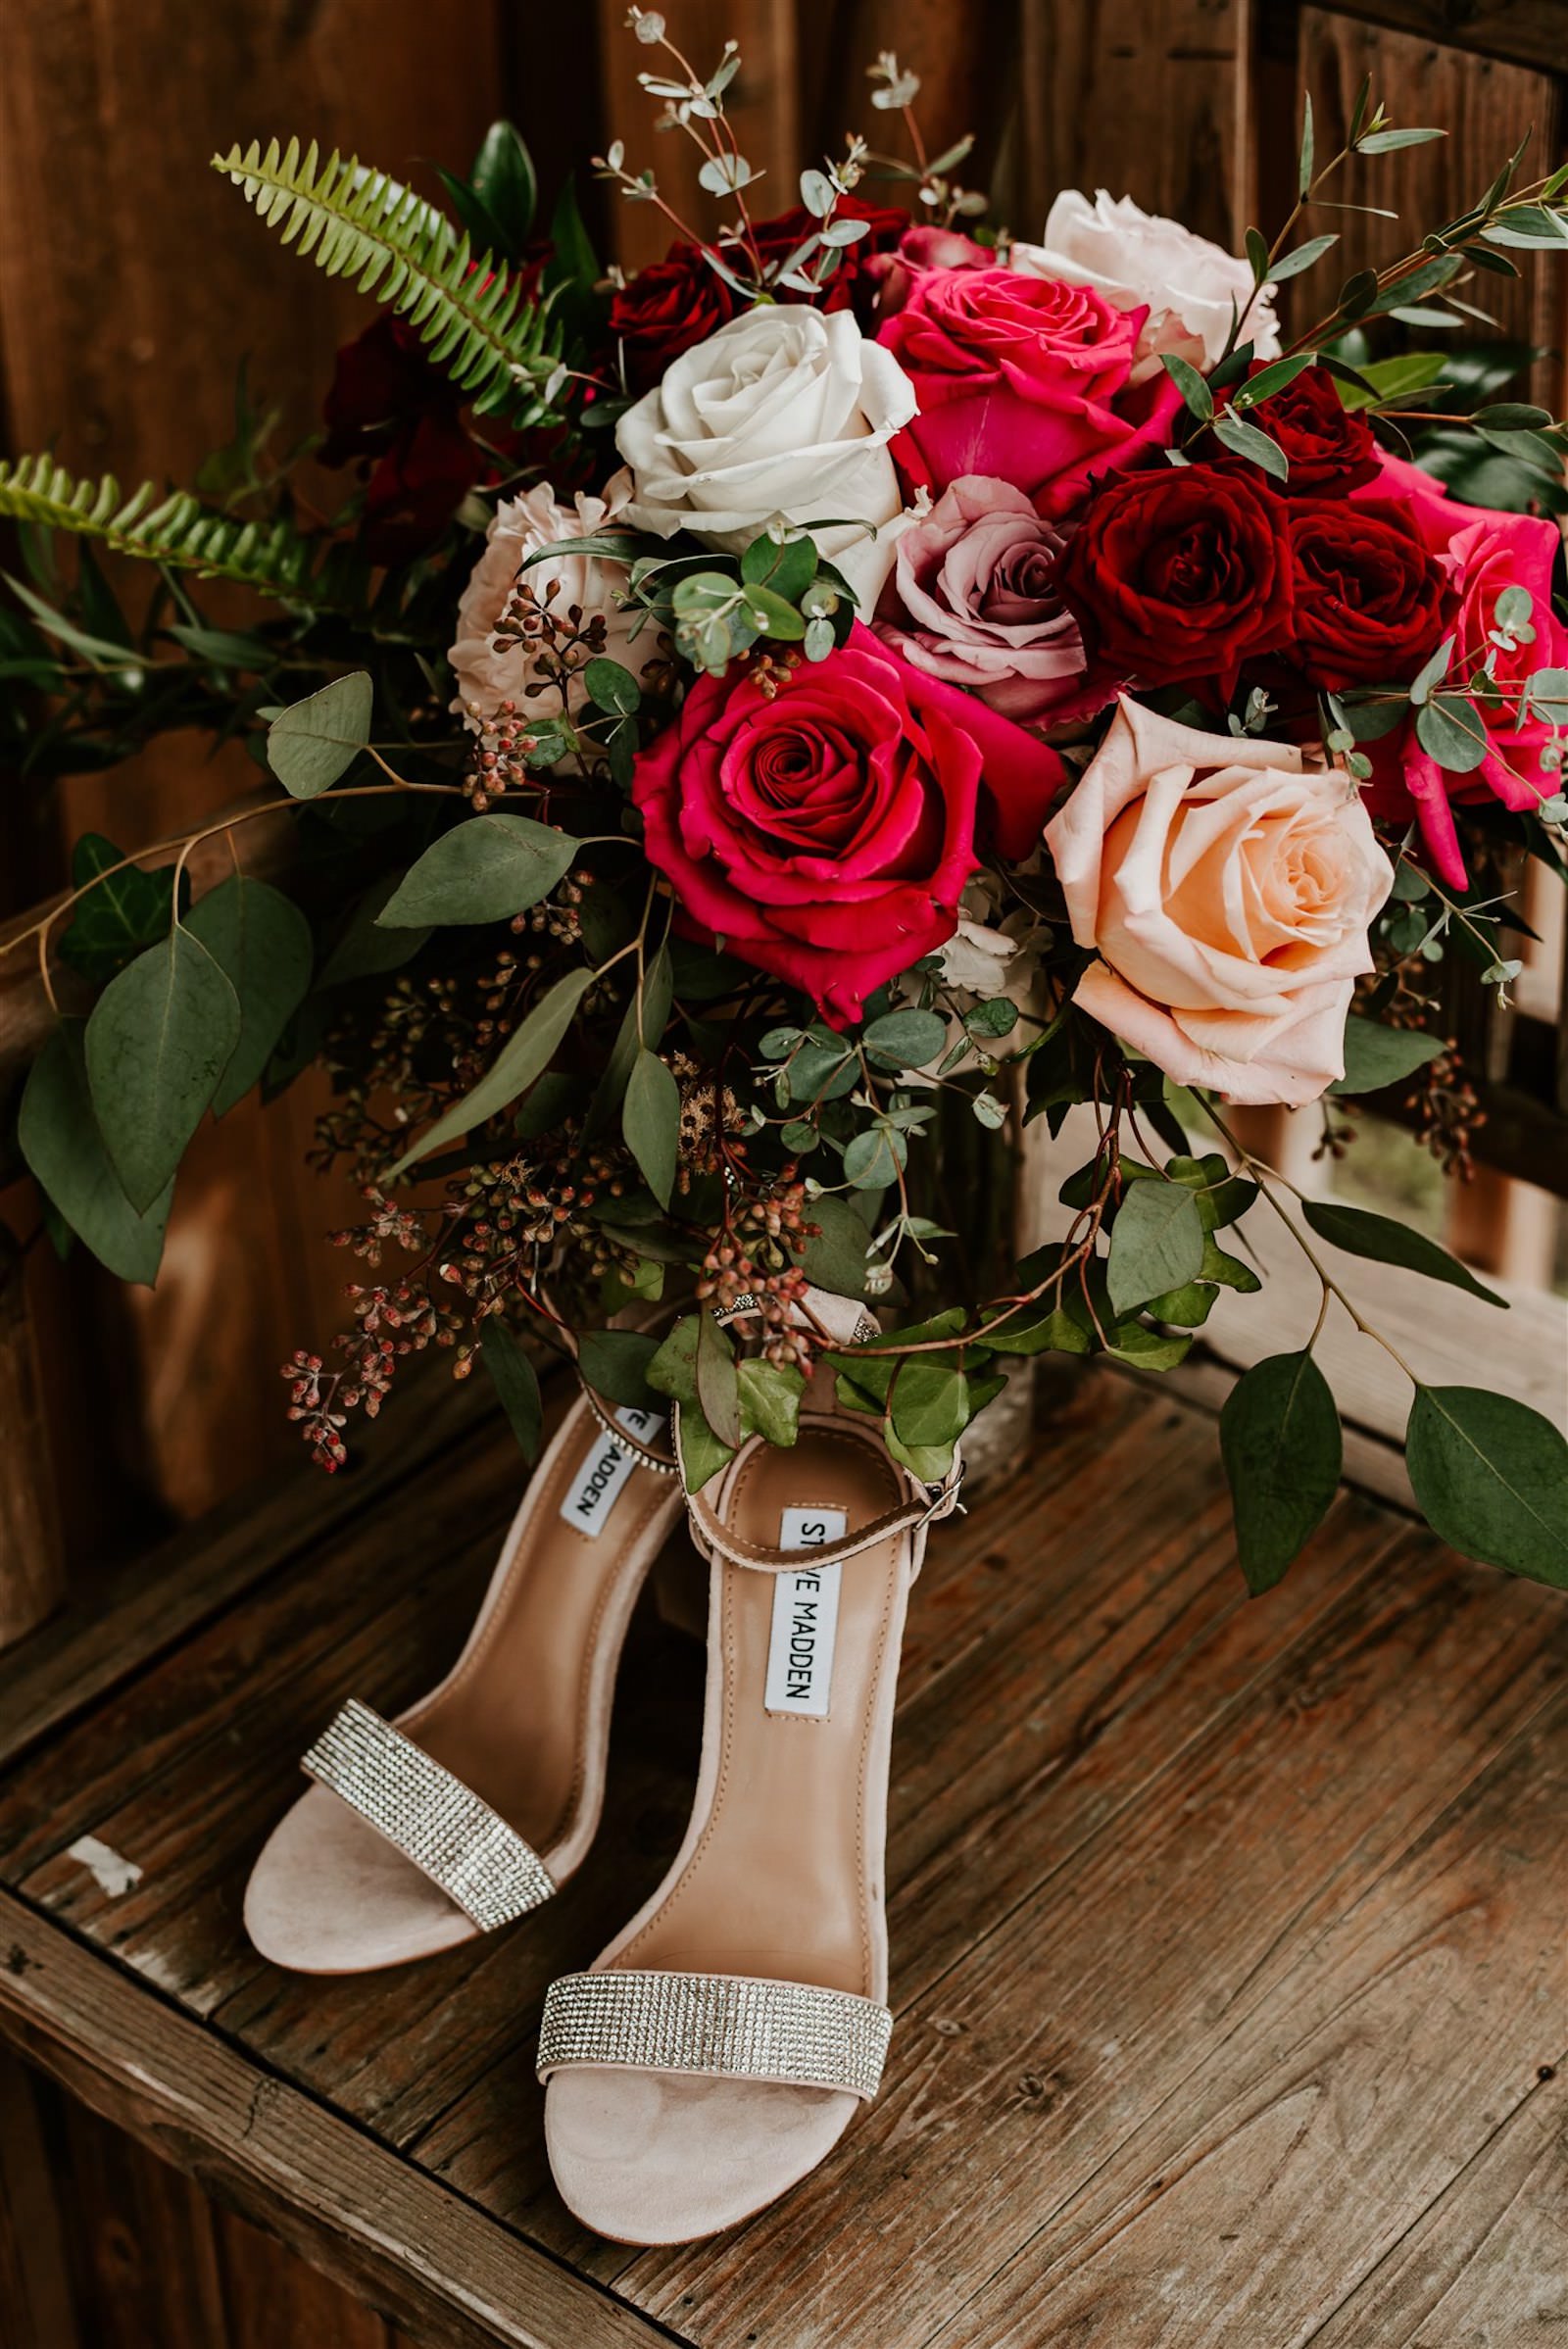 Designer Wedding Shoes Bridal Heels Steve Madden Champagne Rhinsetone Strap High Heels | Deep Red Burgundy Blush Pink Roses and Greenery Bouquet by Tampa Florist Monarch Events and Designs